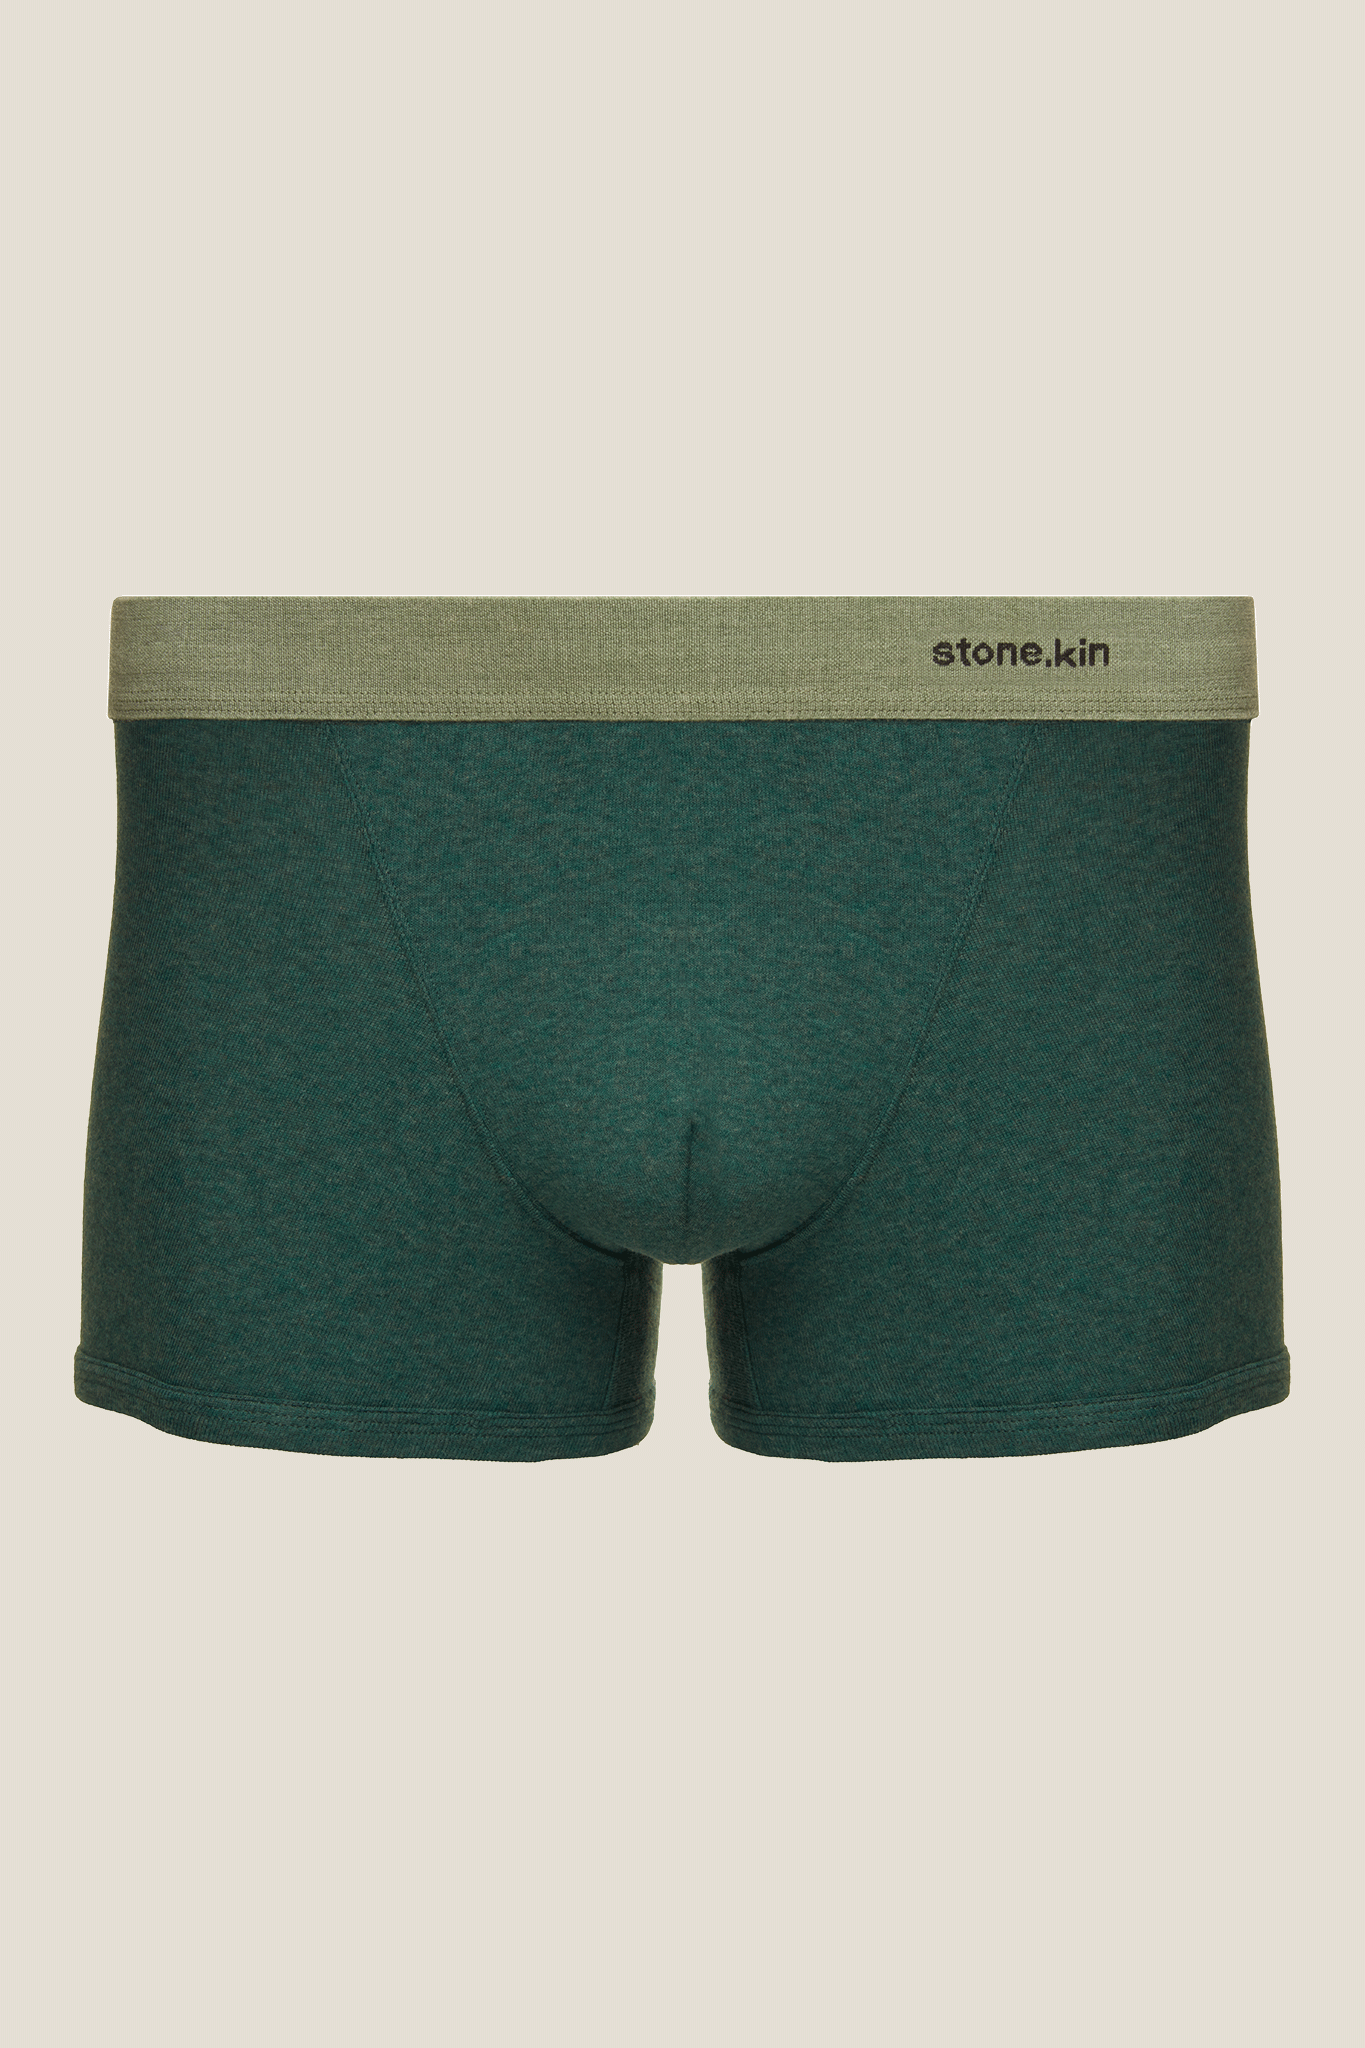 Stone.kin Mens Boxer Brief in Teal Organic Cotton 